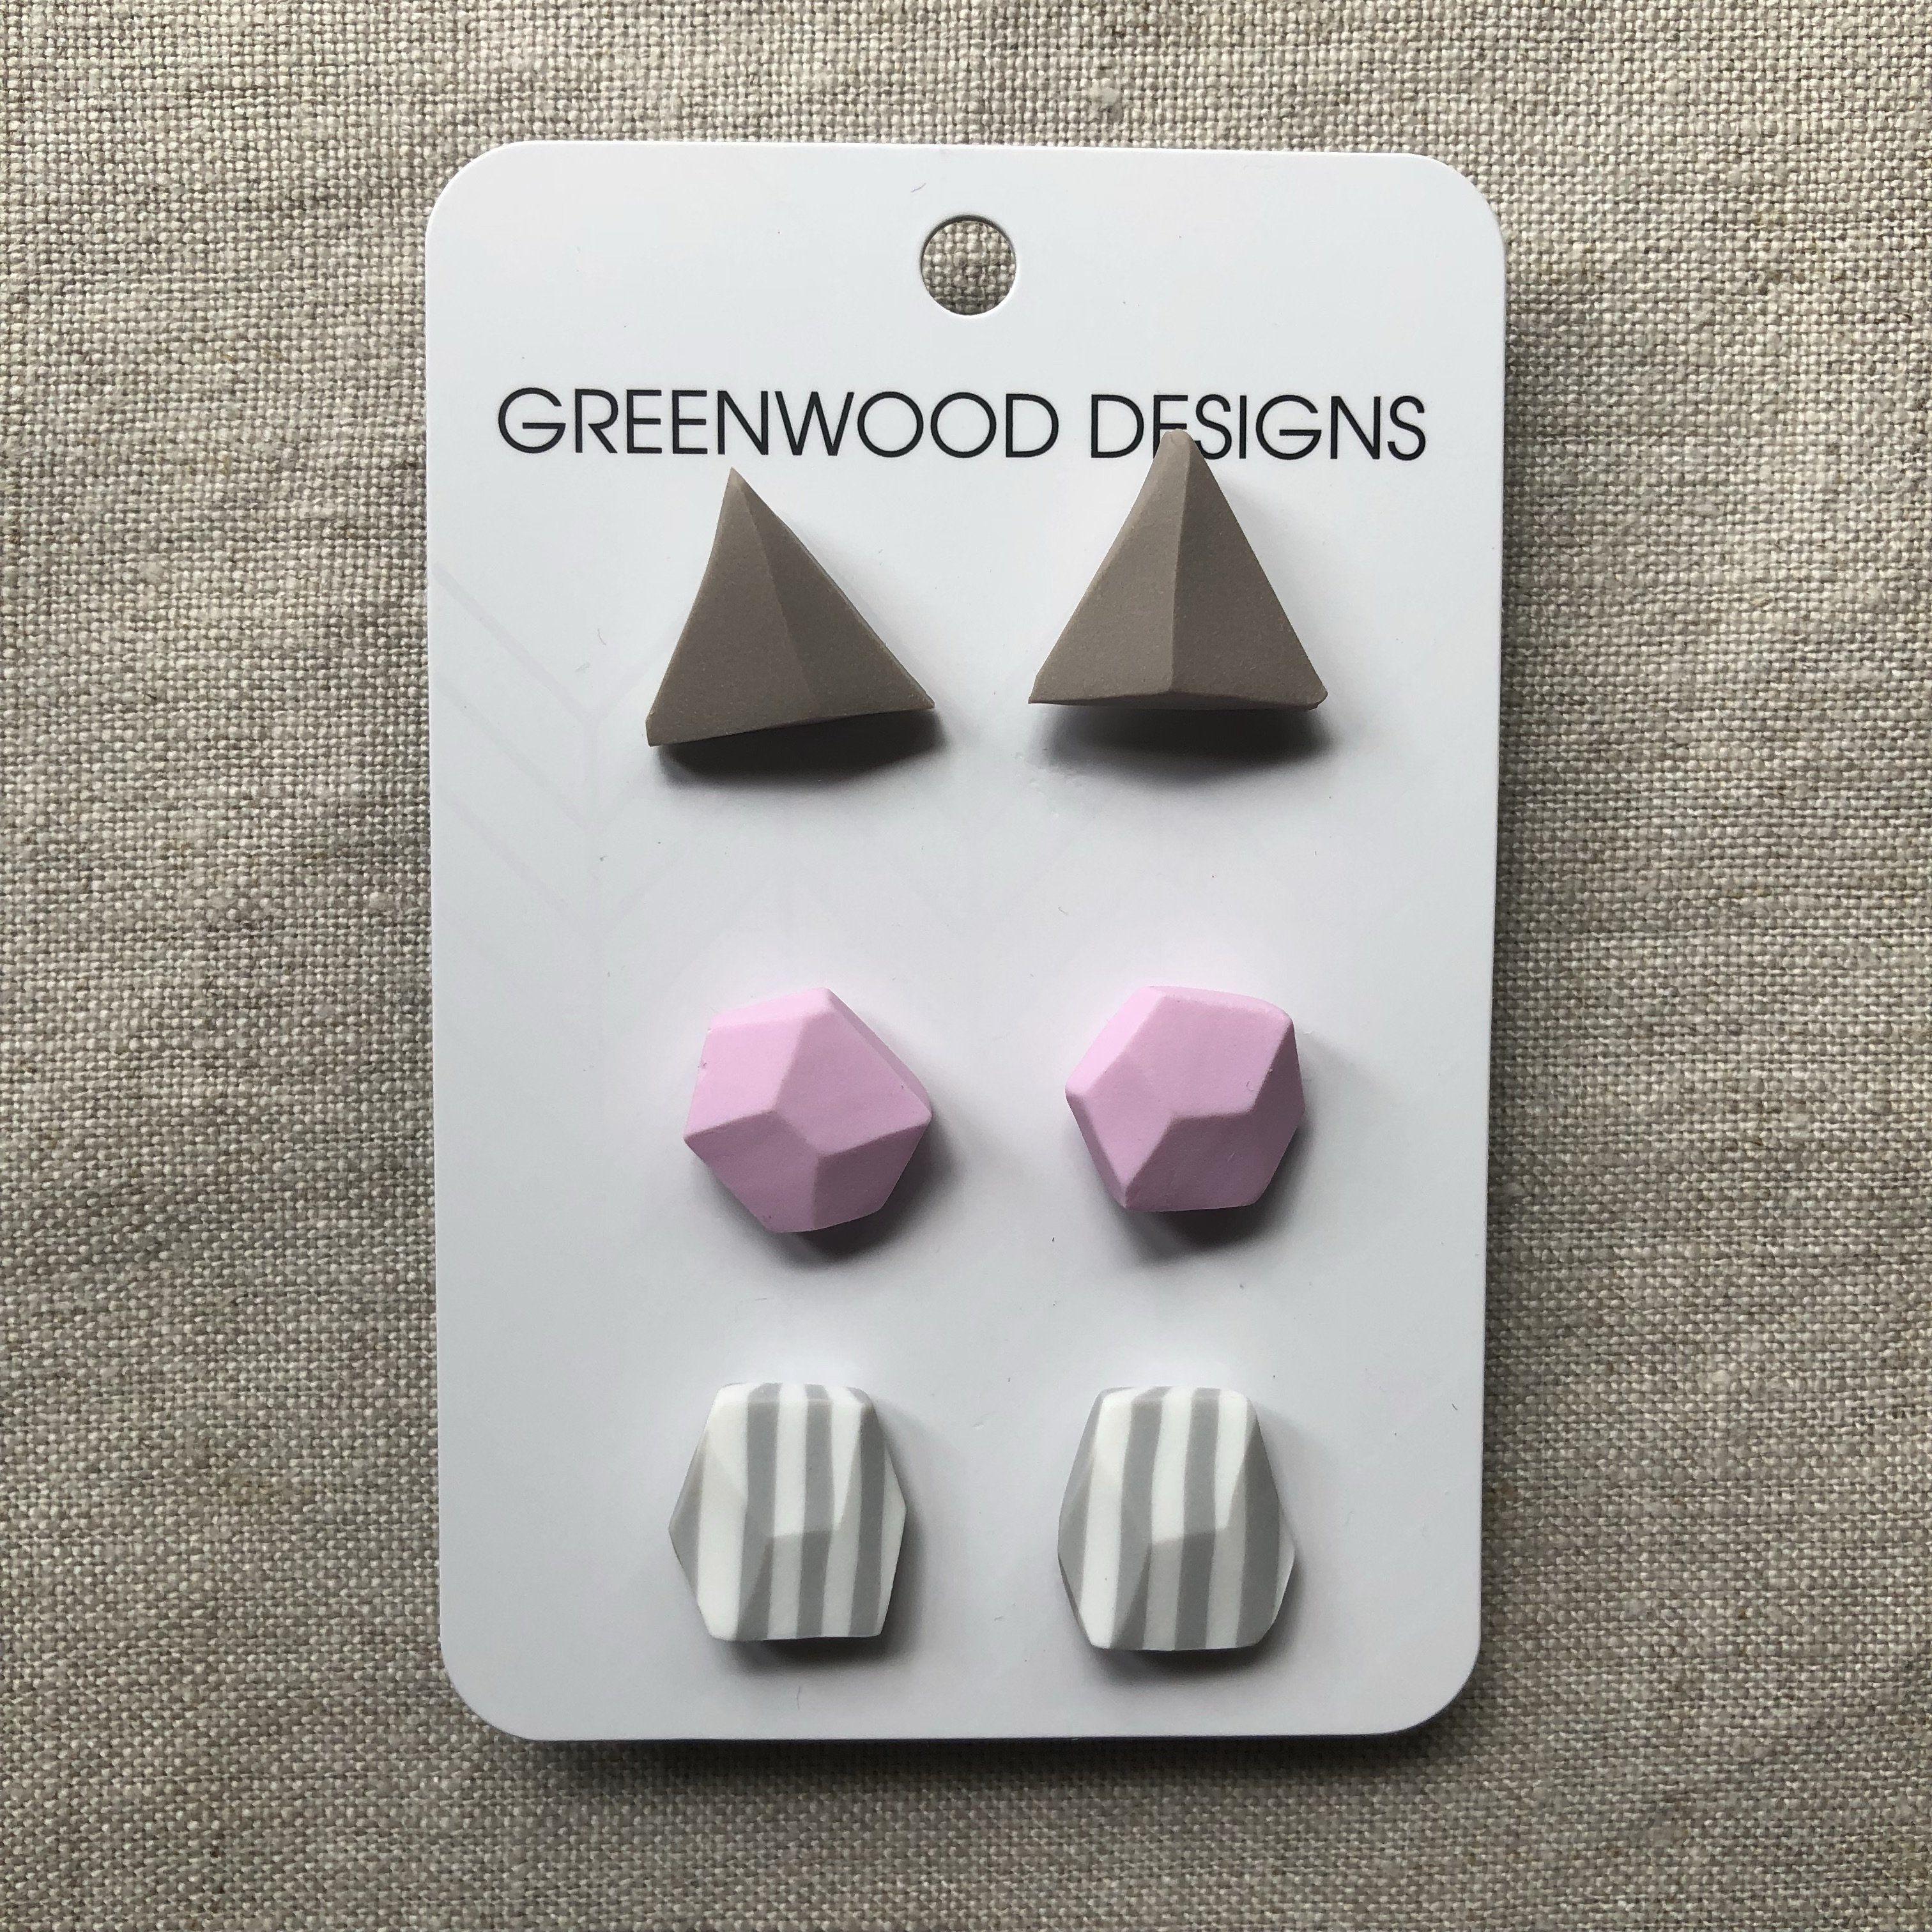 Camel Triangle Logo - Greenwood Design Triple Earrings Packs- Camel Triangles/ Pale Pink ...